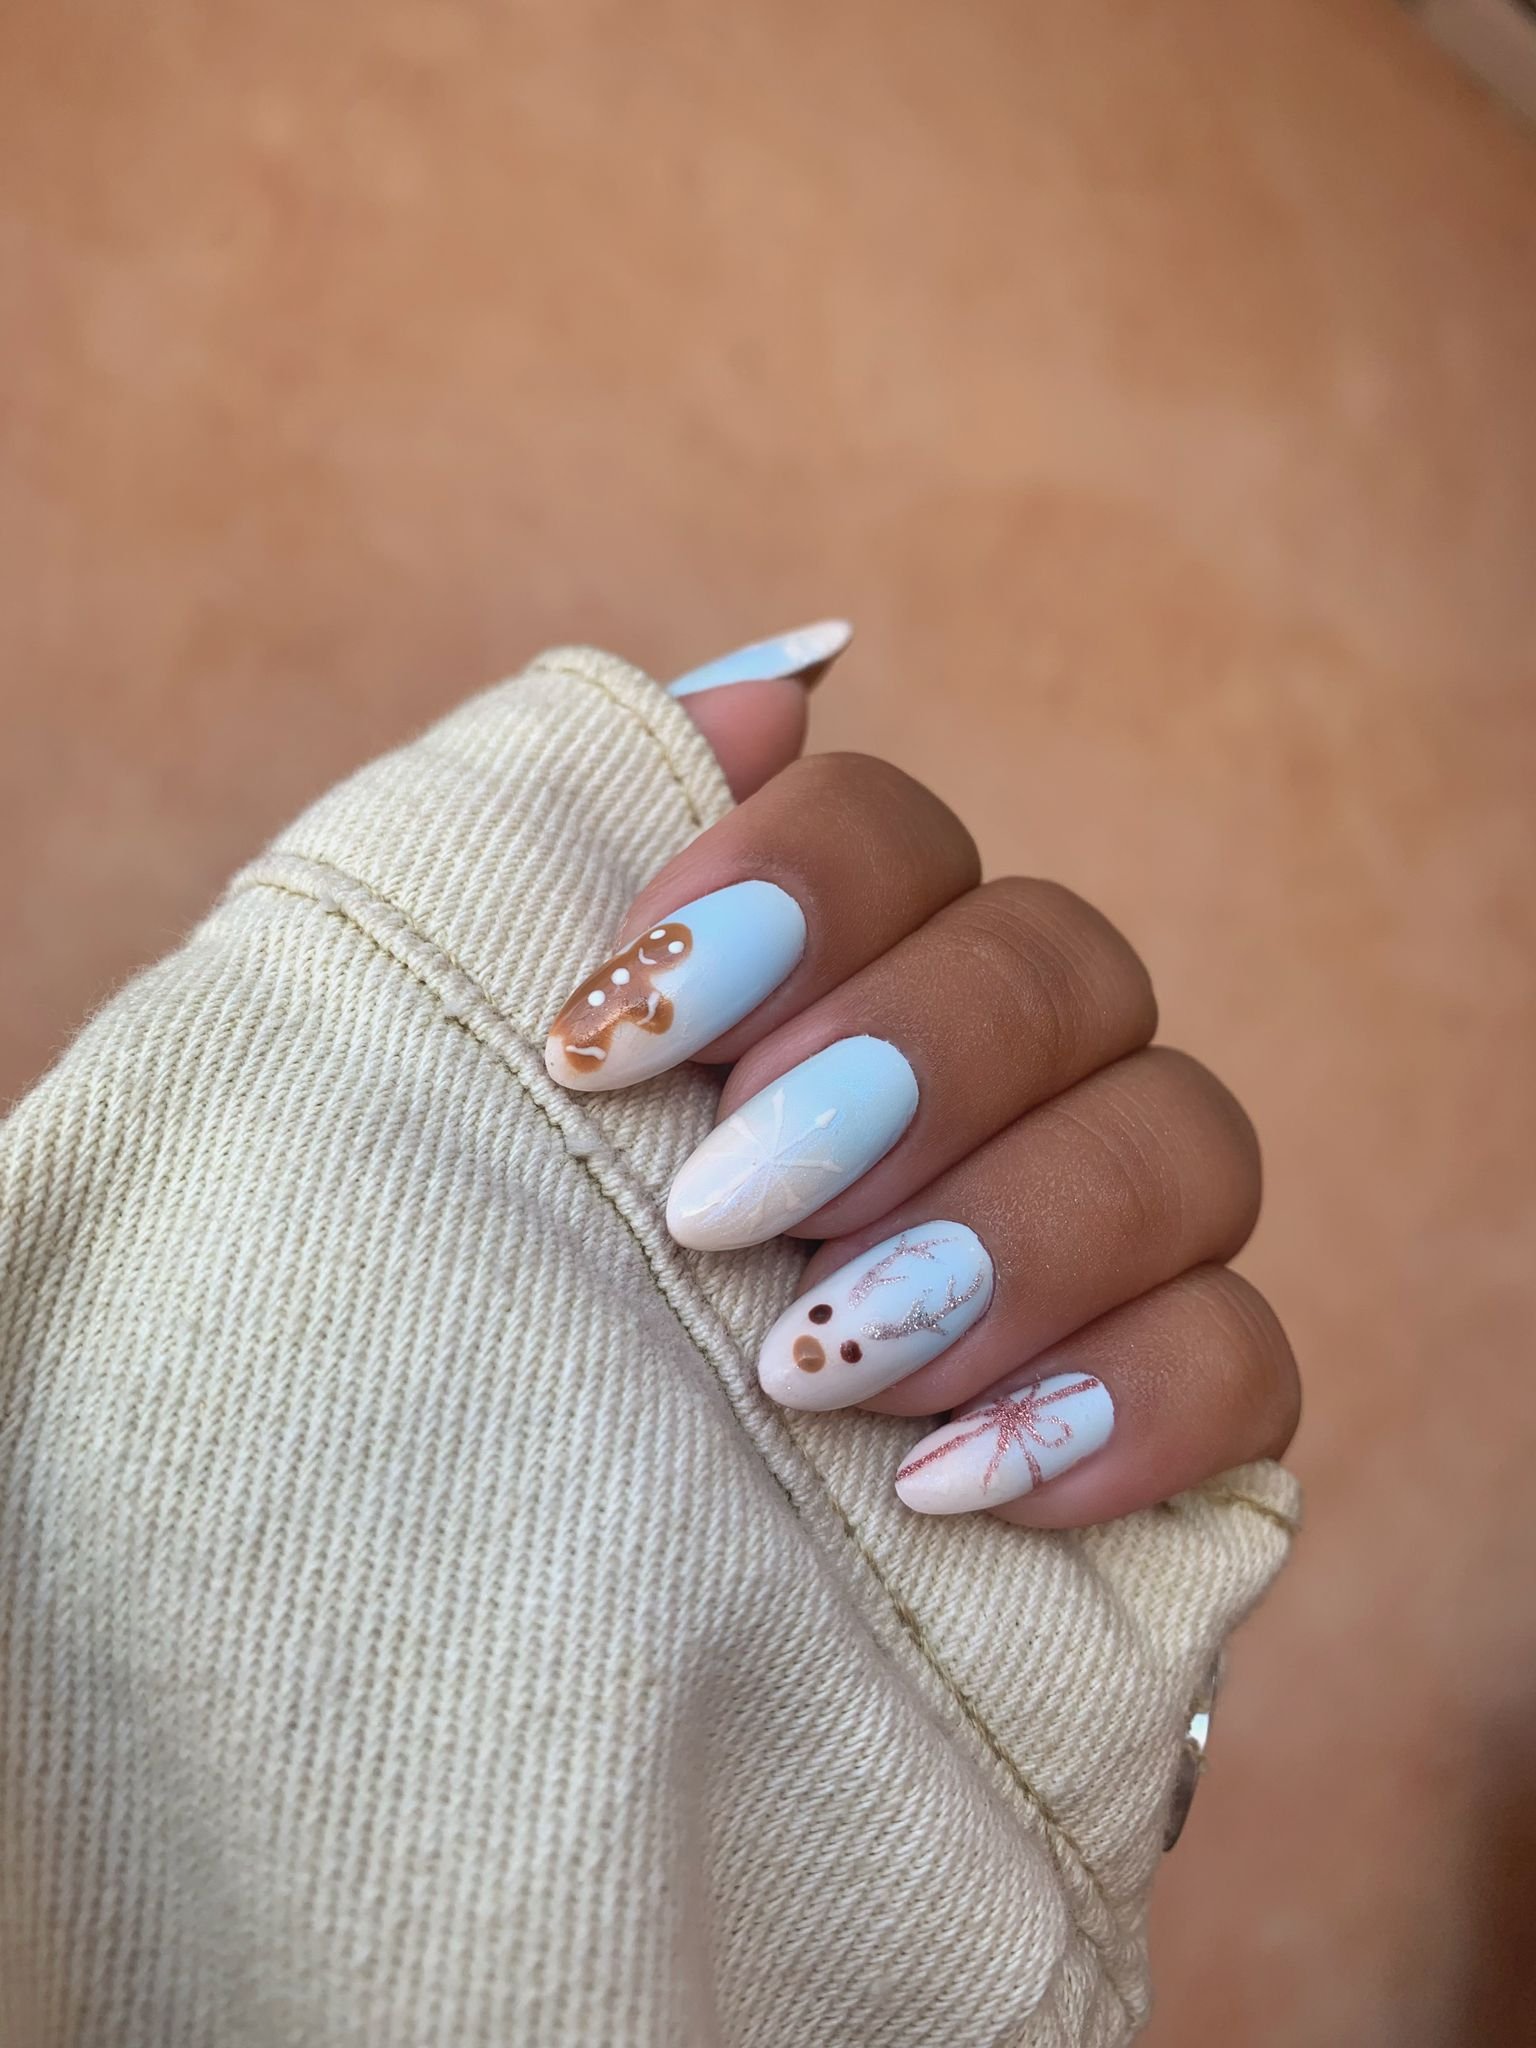 The 35 Cute Valentine's Day Nails : White Acrylic French Tips with Blue  hearts